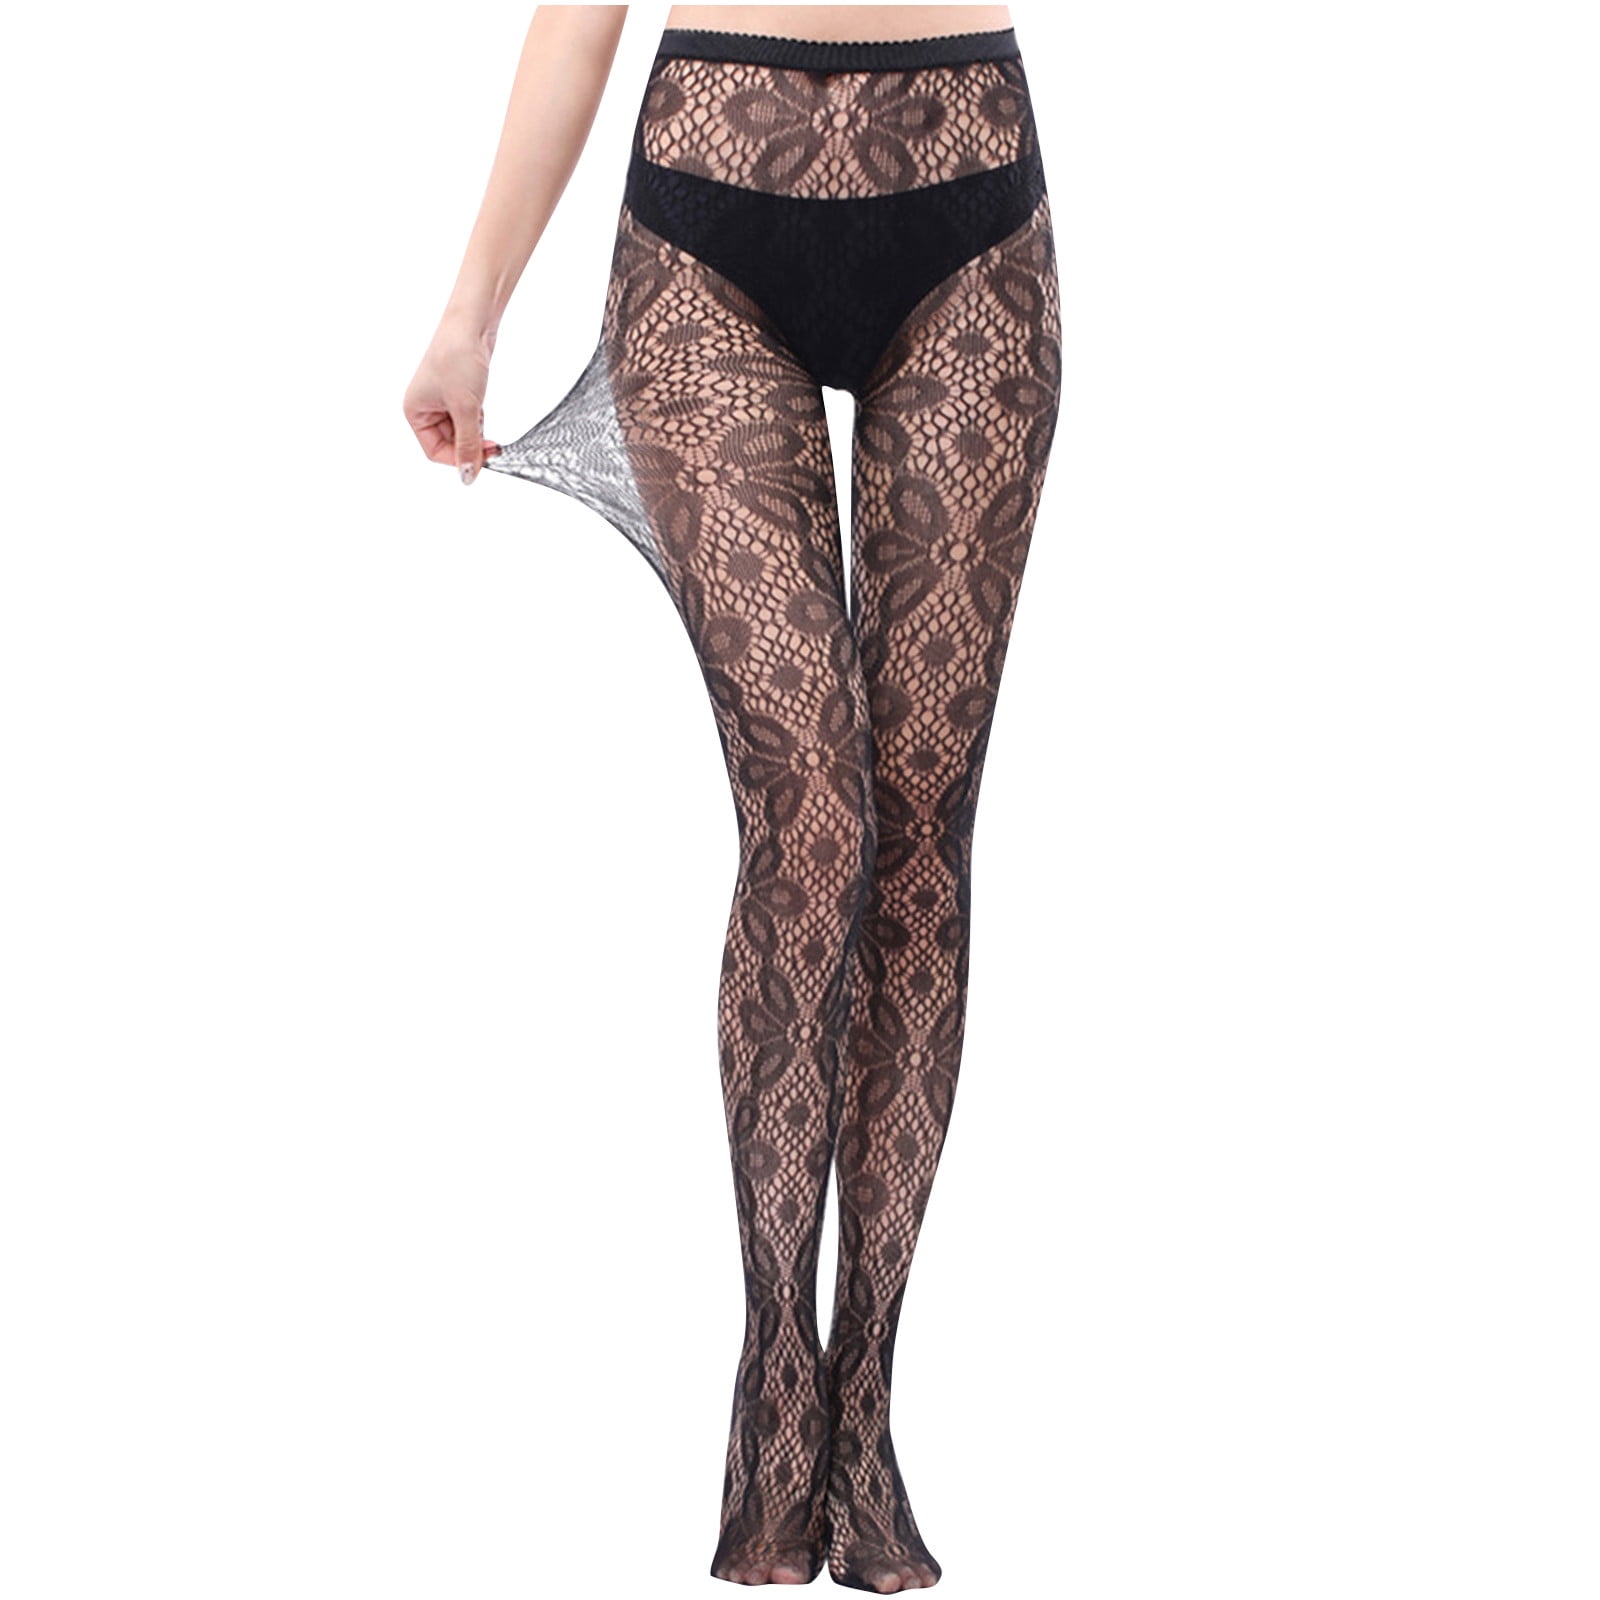 Spanx Sara Blakely All Day Shaping Fishnet Floral Tights Very